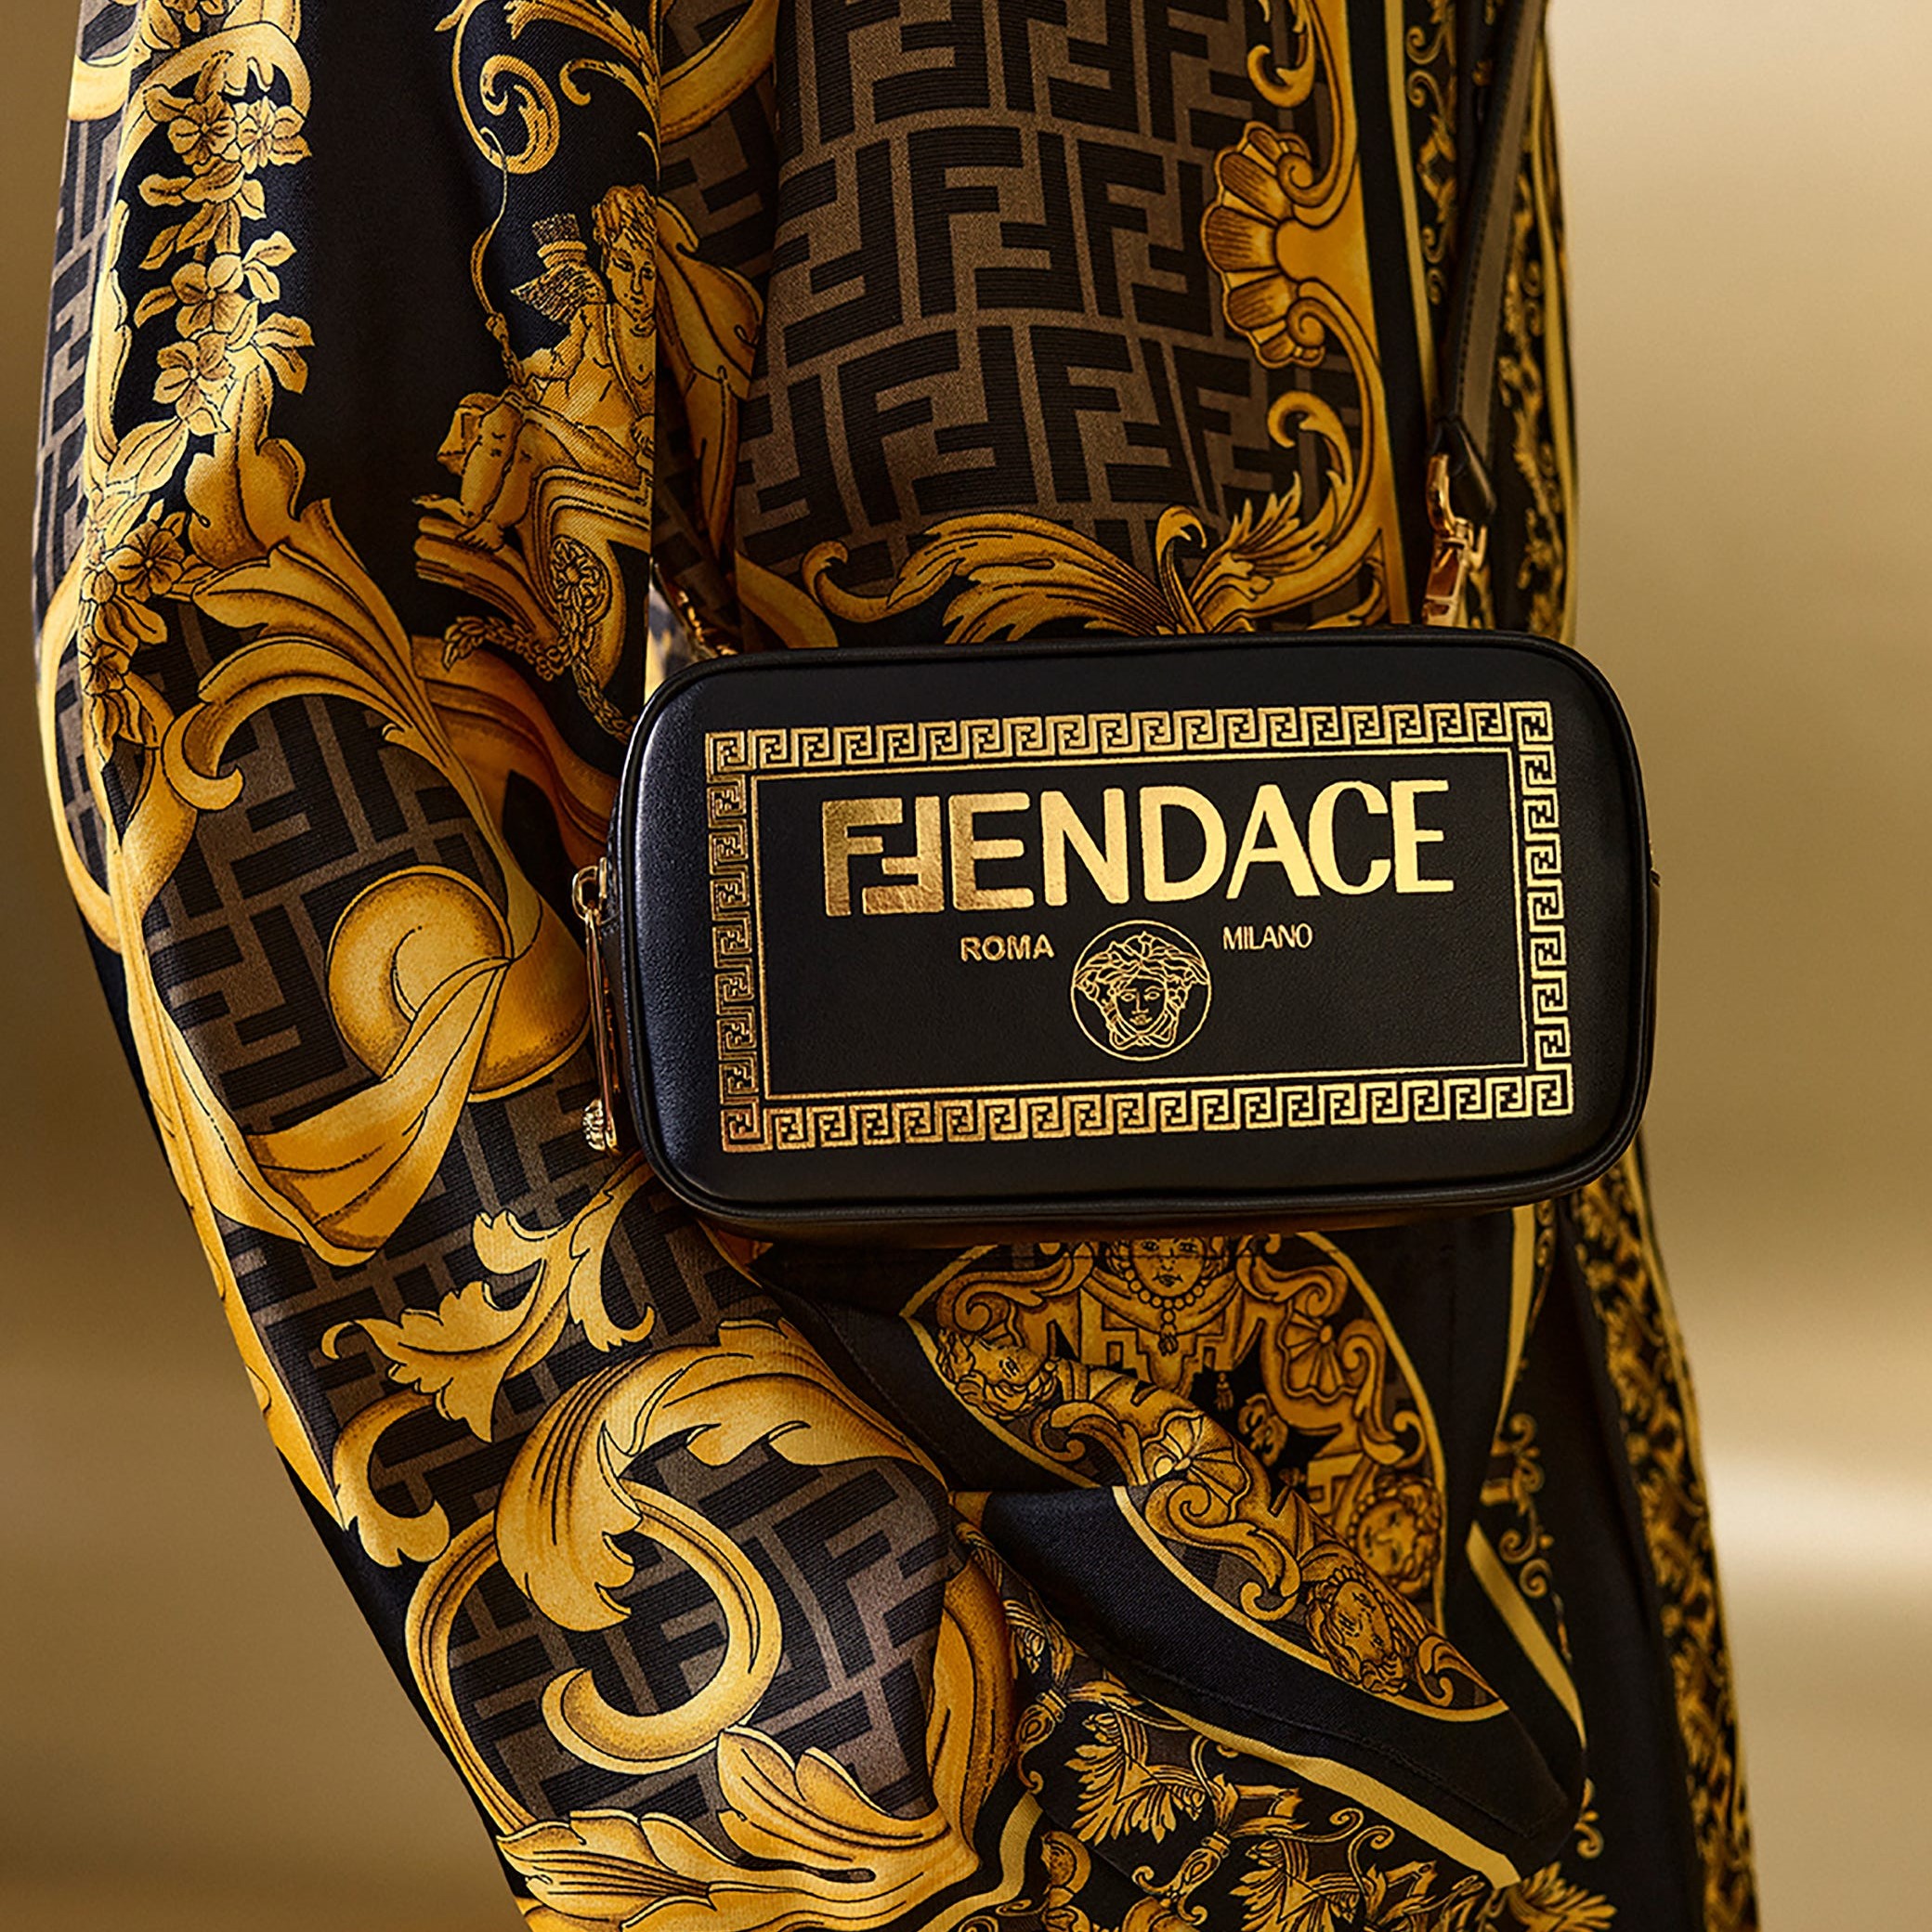 Fendace: Bright Fendi, Versace Collaboration Pops Up In Beverly Hills